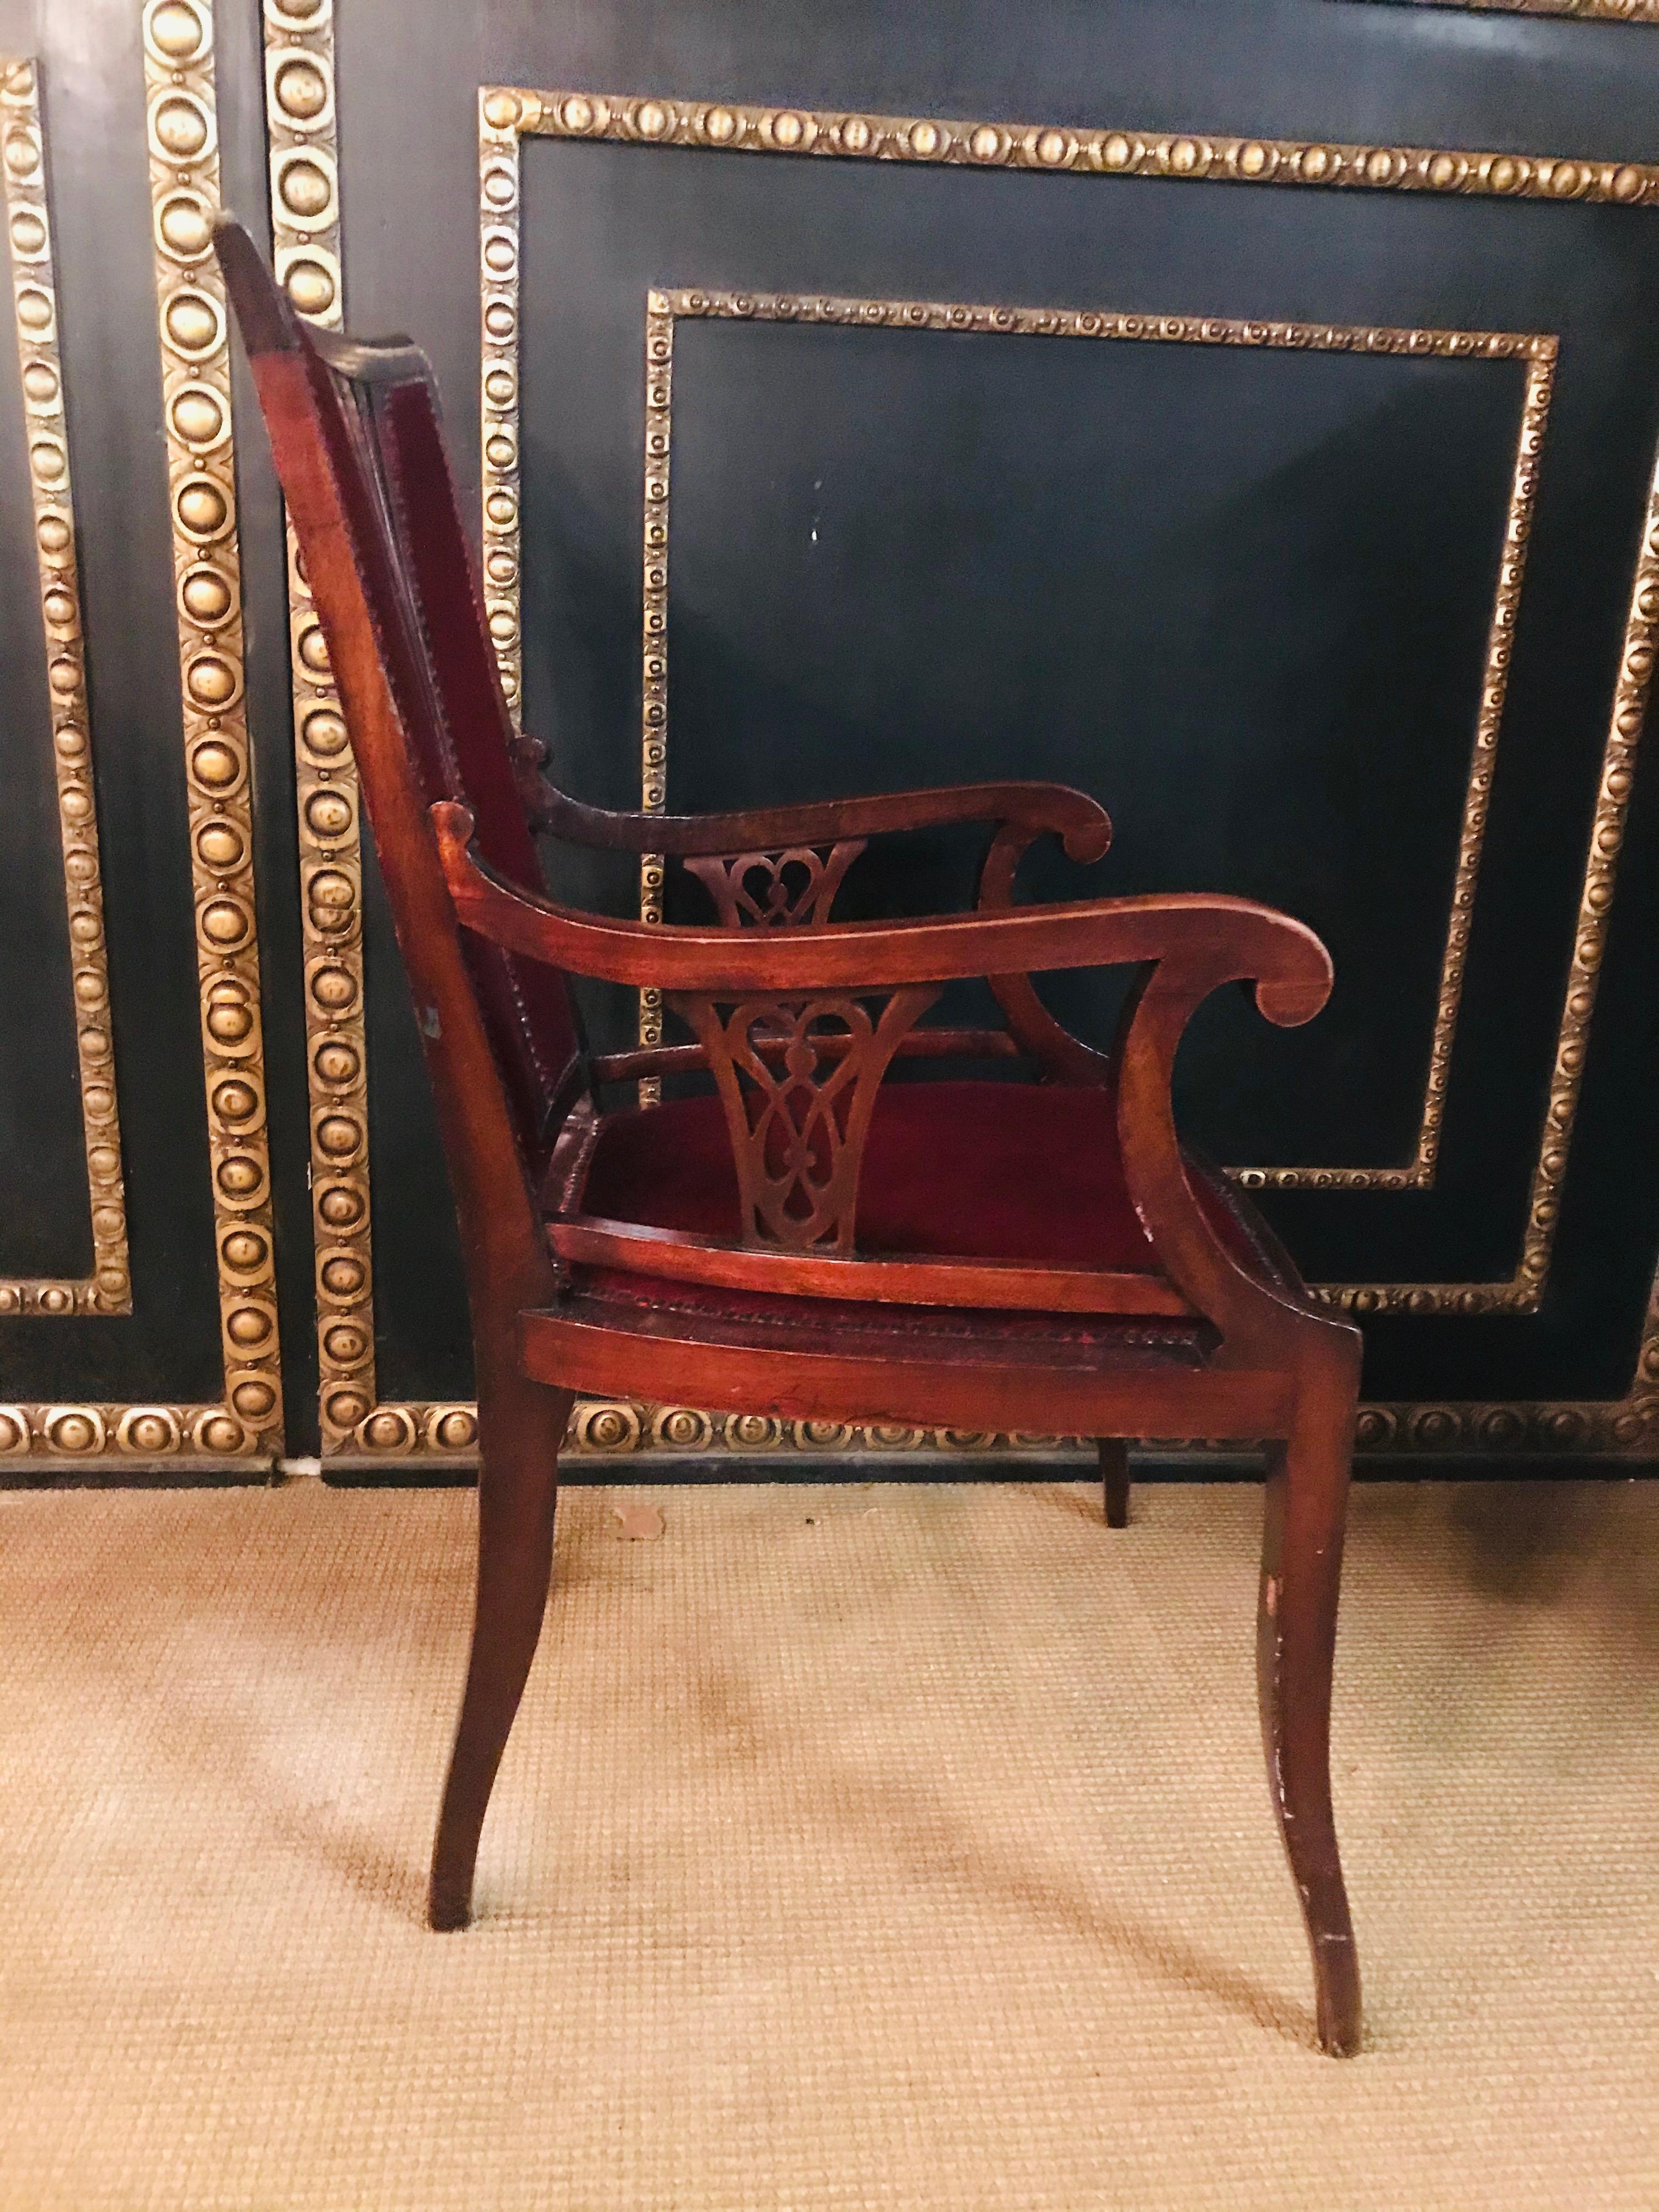 Mahogany Beautiful antique red Art Nouveau or Jugendstil 20th Century Armchair mahogany 